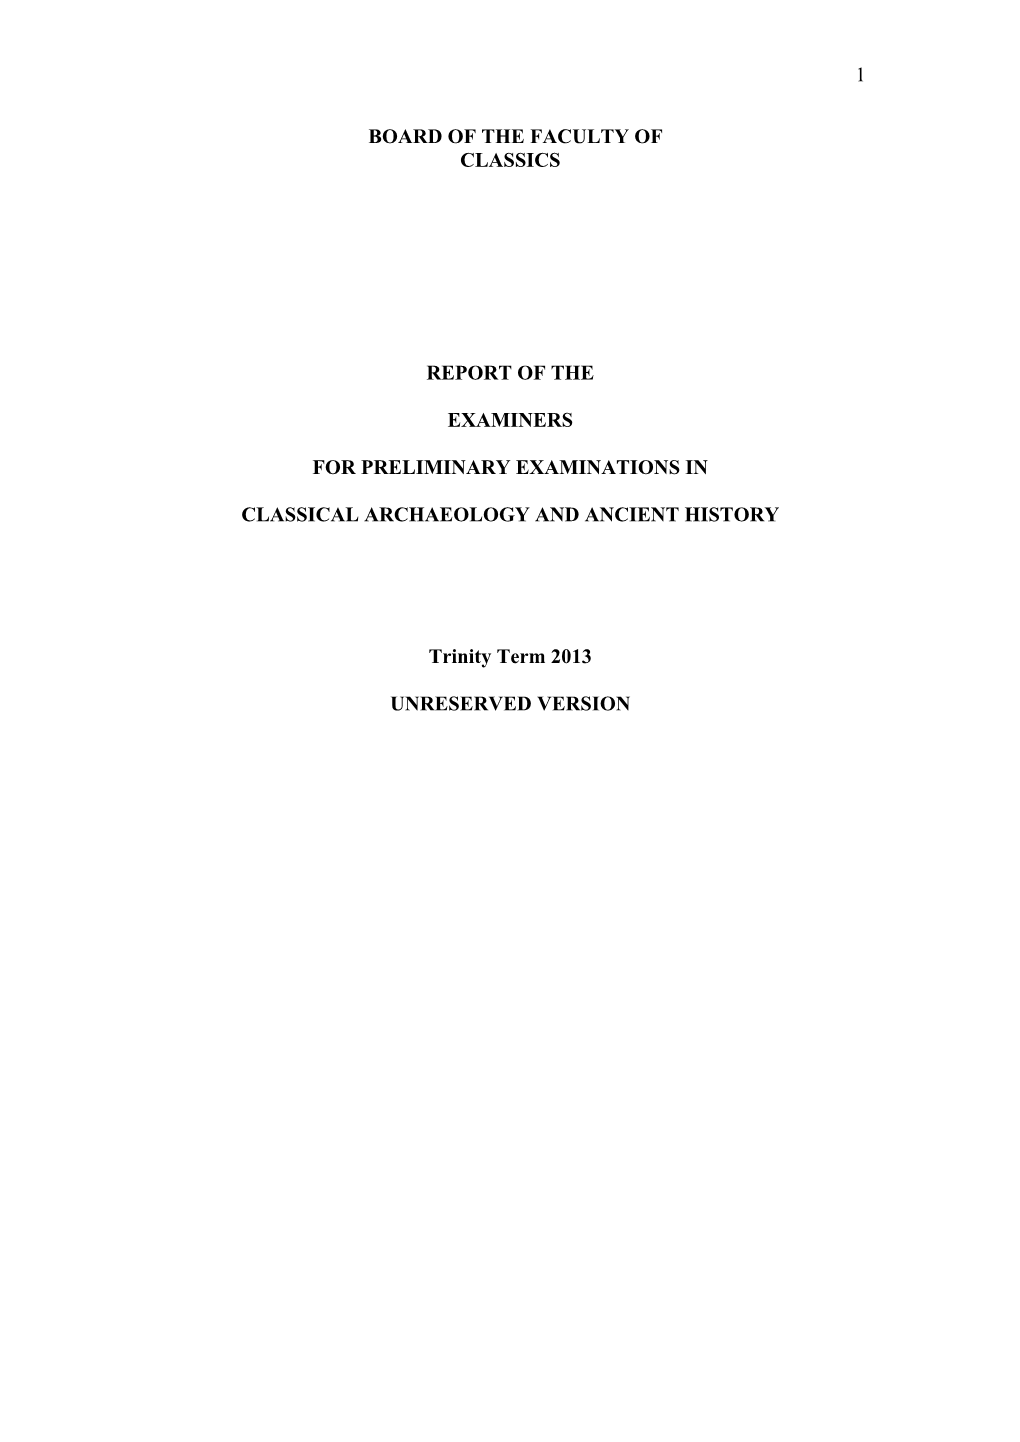 1 Board of the Faculty of Classics Report of The